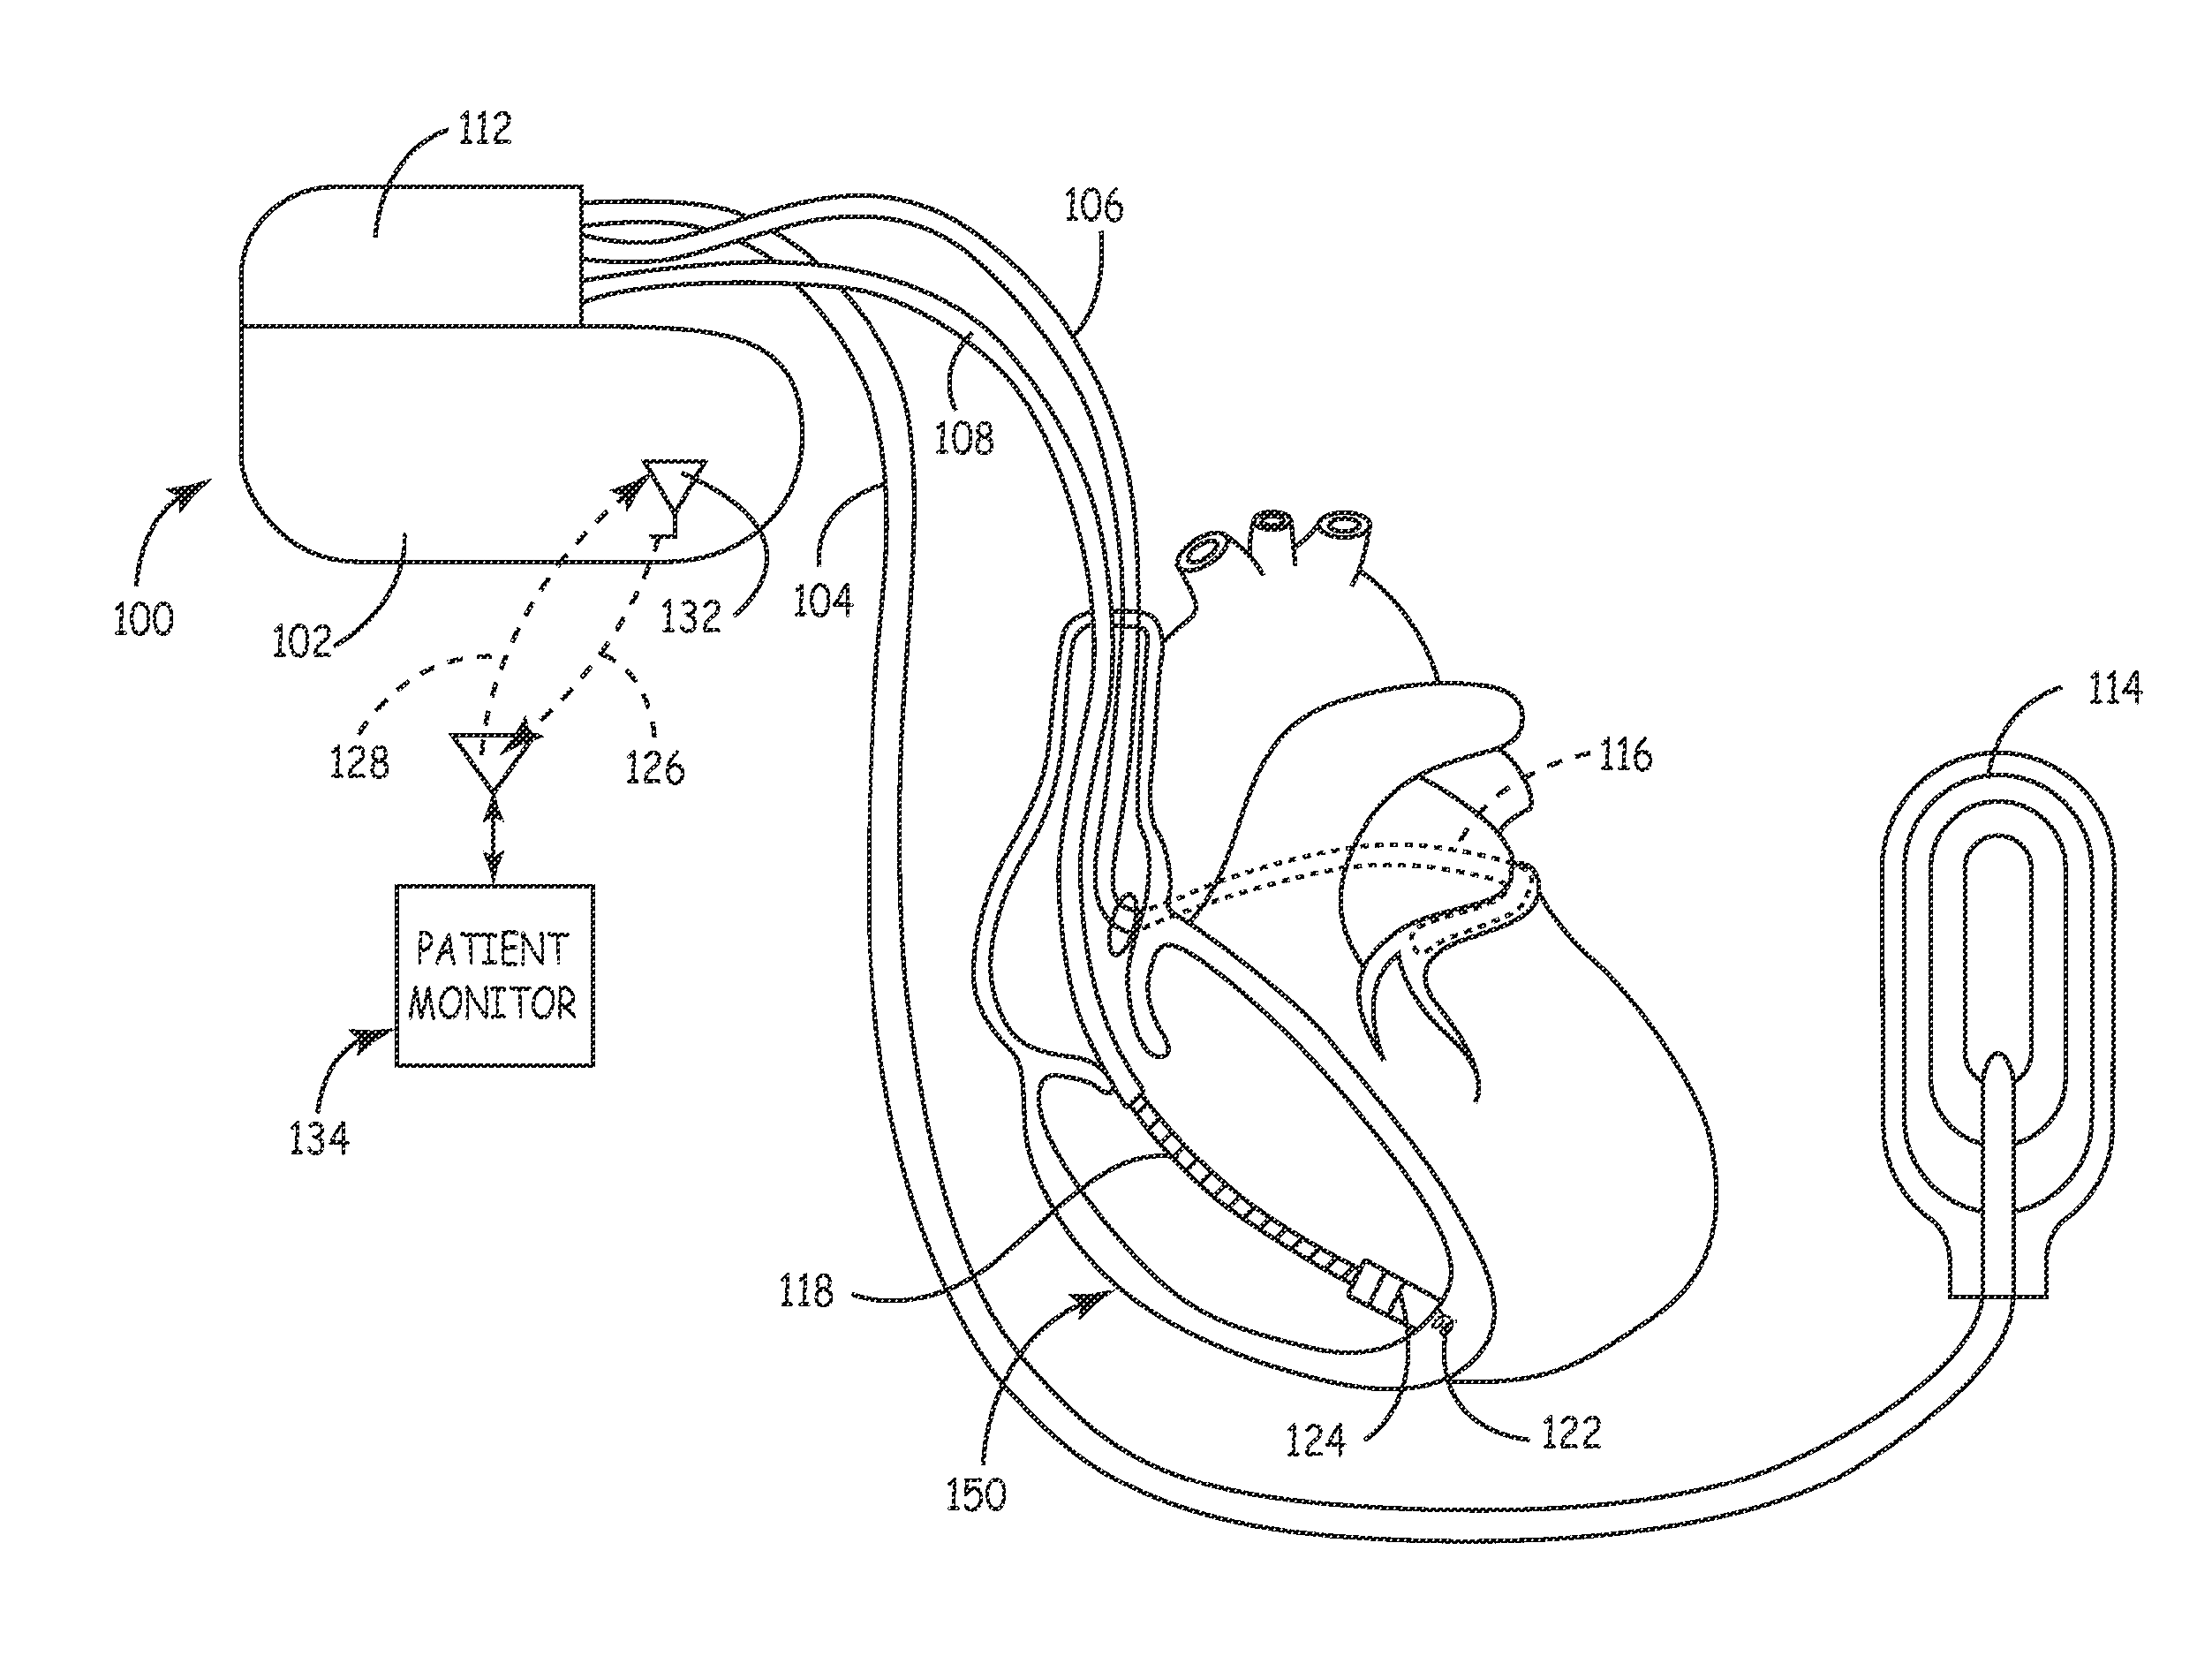 System and Method for Real-Time Remote Monitoring of Implantable Medical Devices